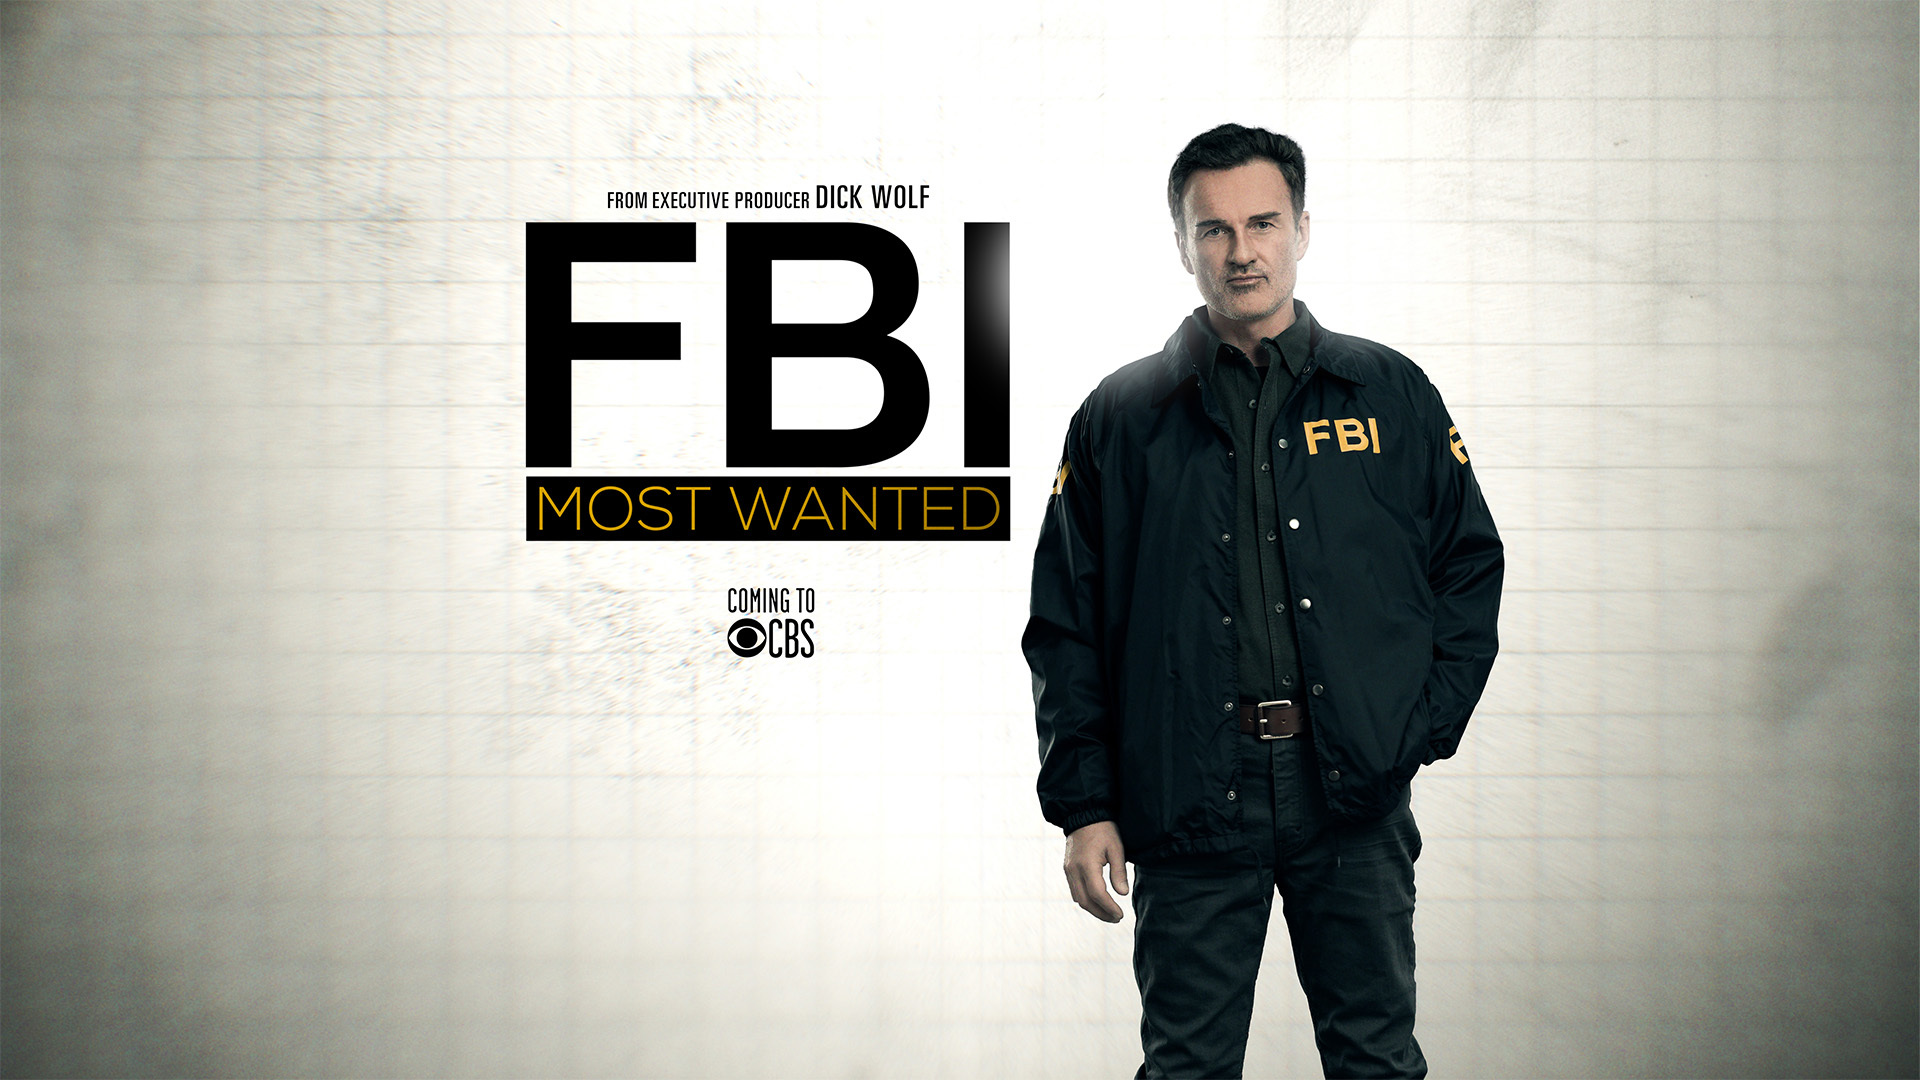 FBI Most Wanted Season 1 Episode 11 and Episode 14